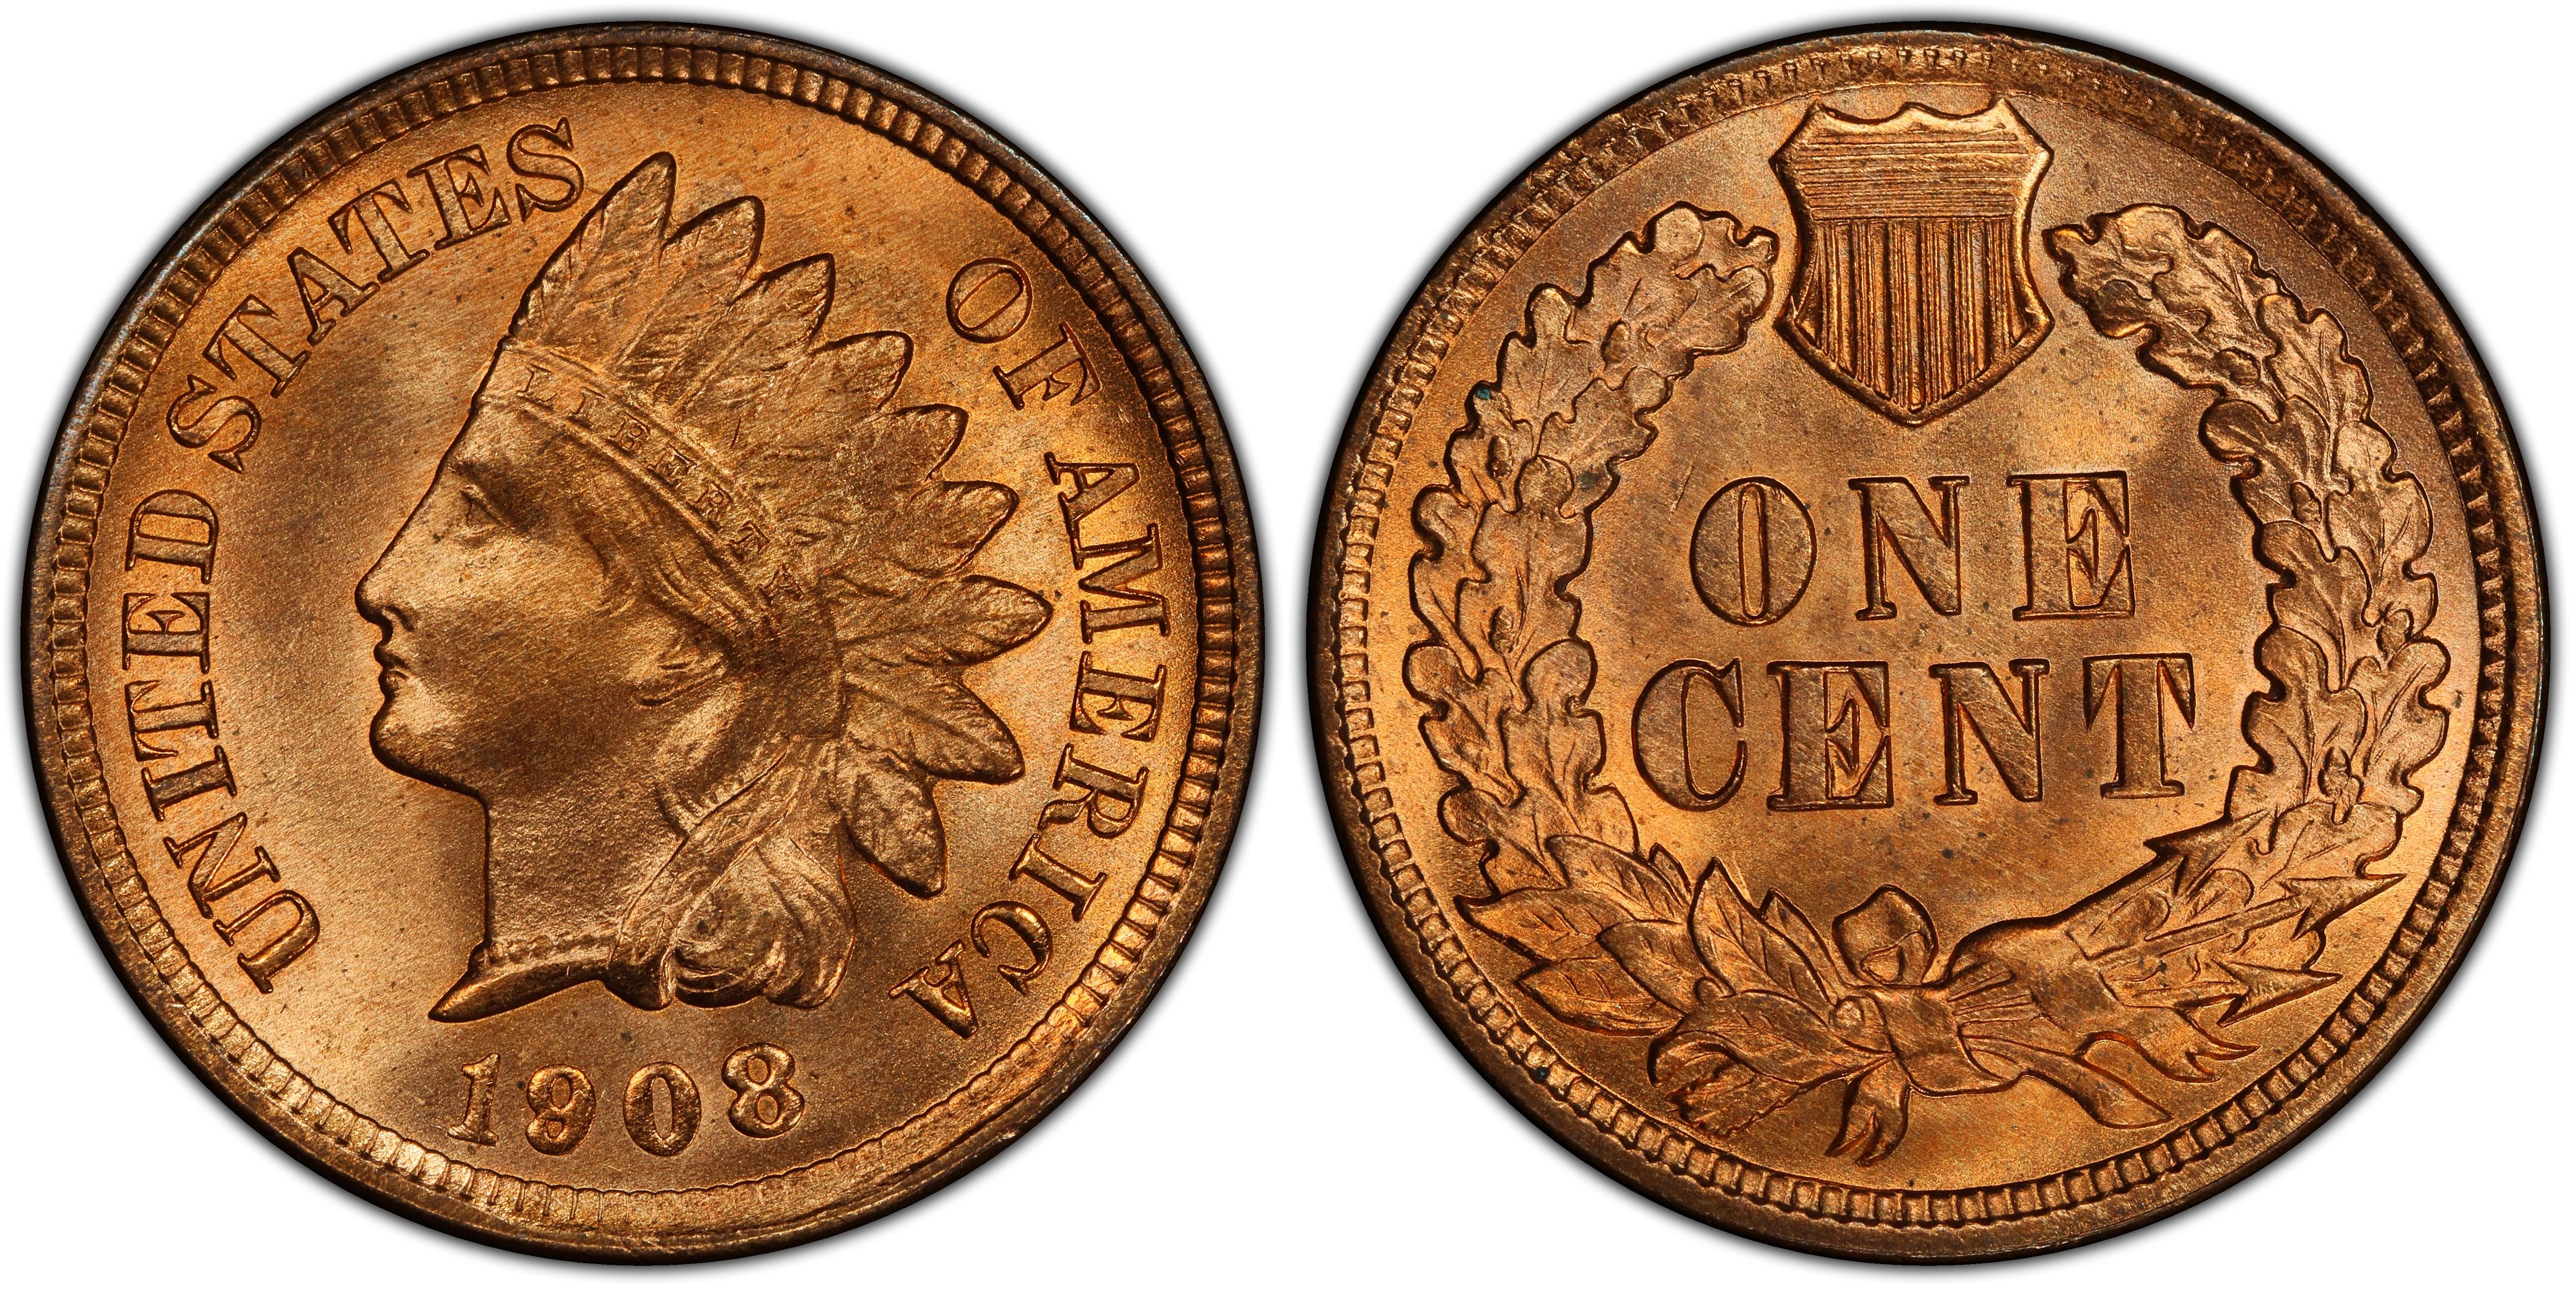 1908 1C, RD (Regular Strike) Indian Cent - PCGS CoinFacts